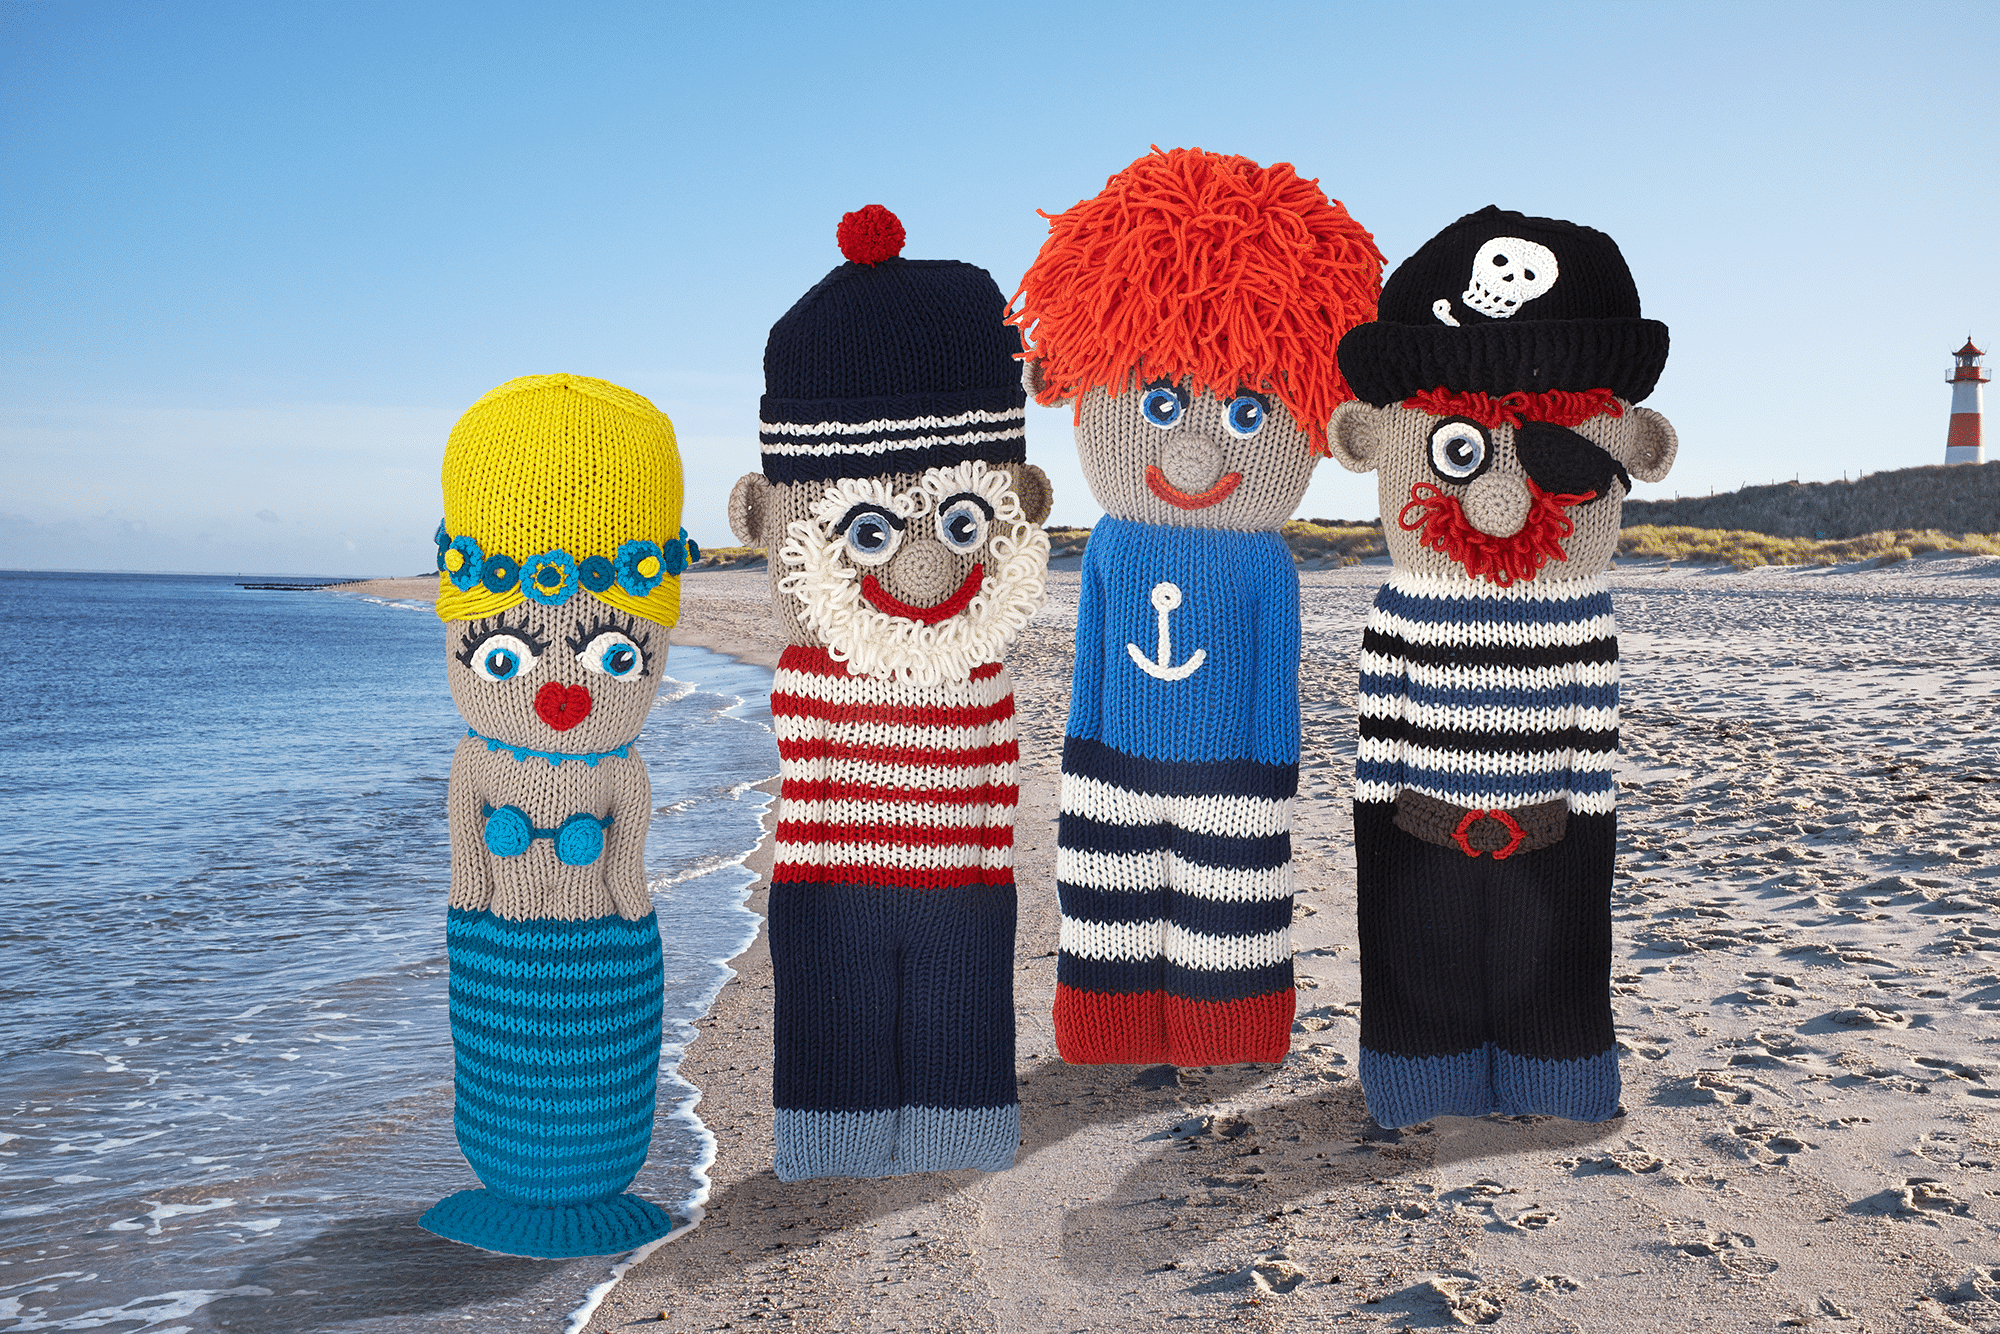 Dolls on the Beach Book Maritime Stitches Adapted